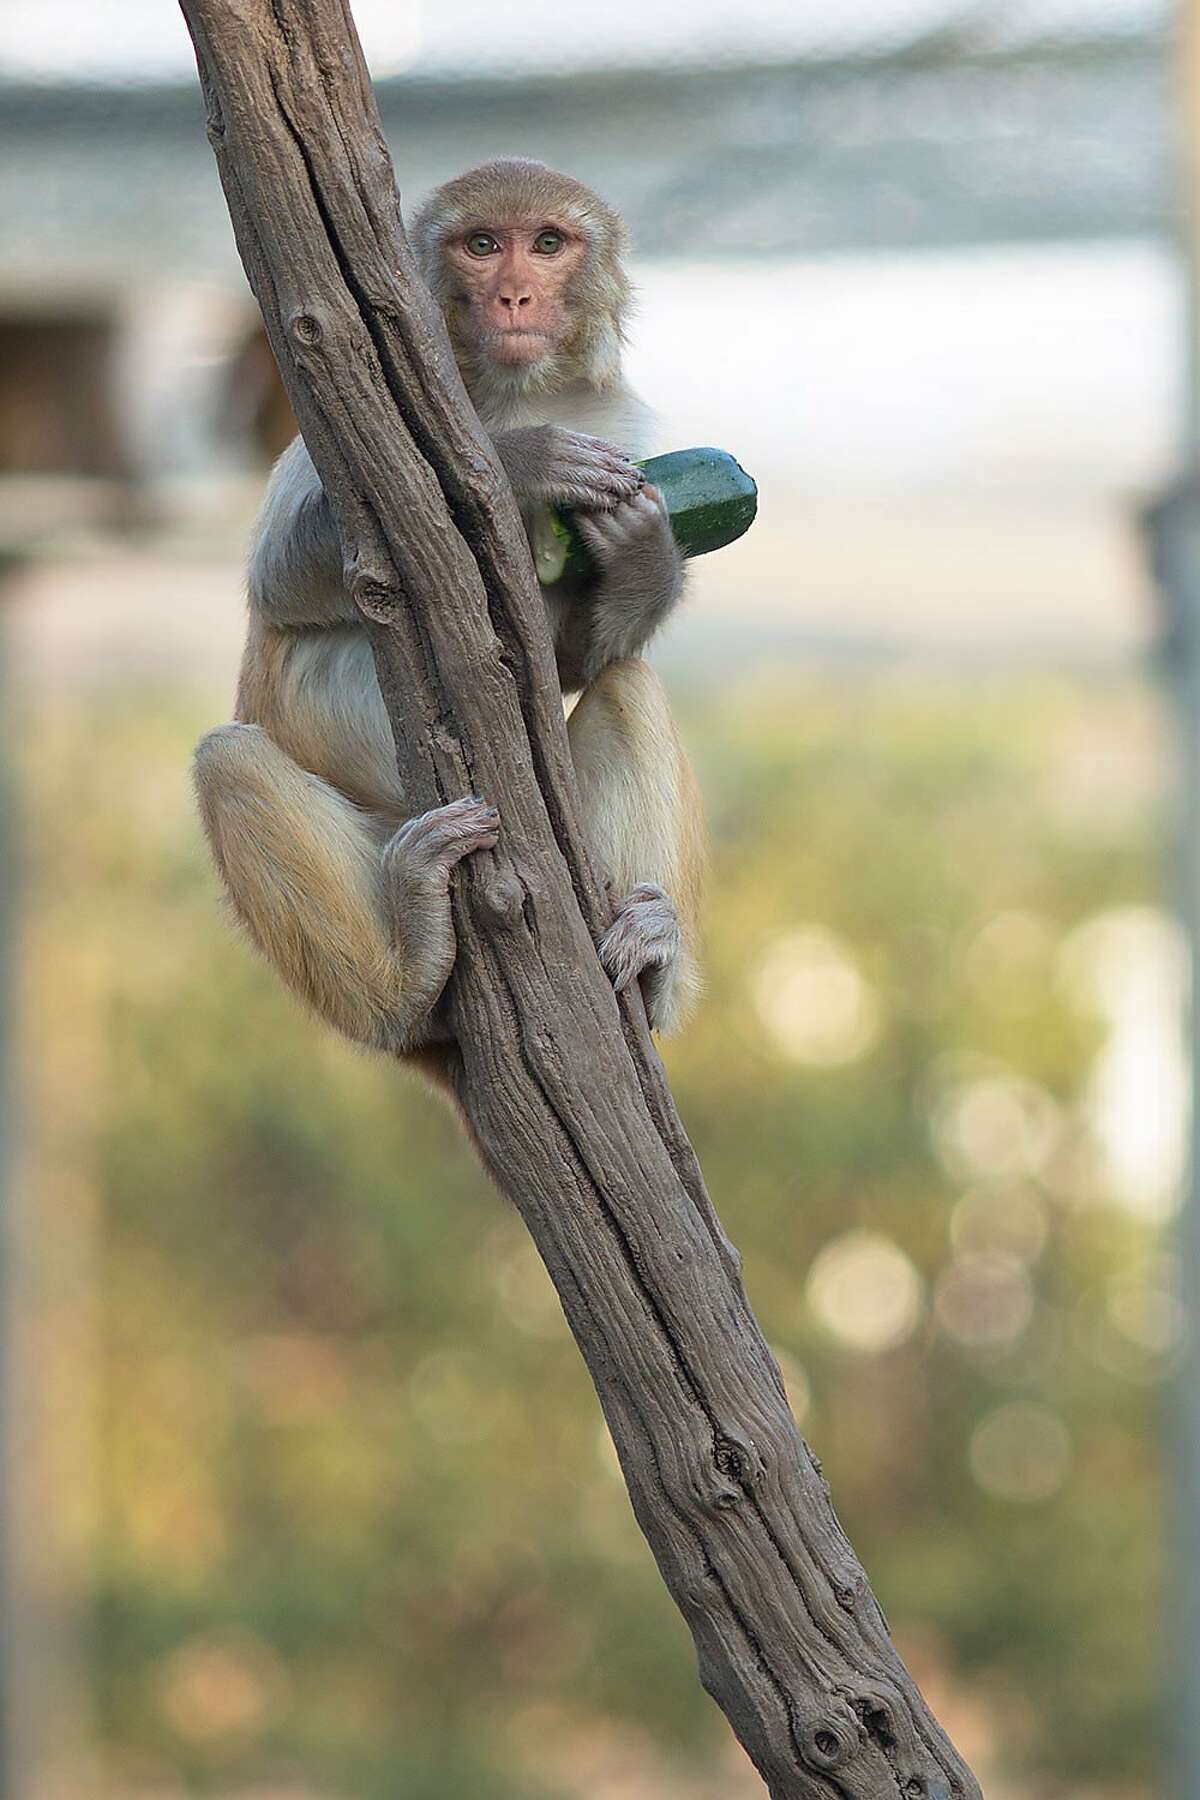 A monkey munches on a zucchini at the California National Primate Research Center at UC Davis, which relies on primates for medical and behavioral studies.